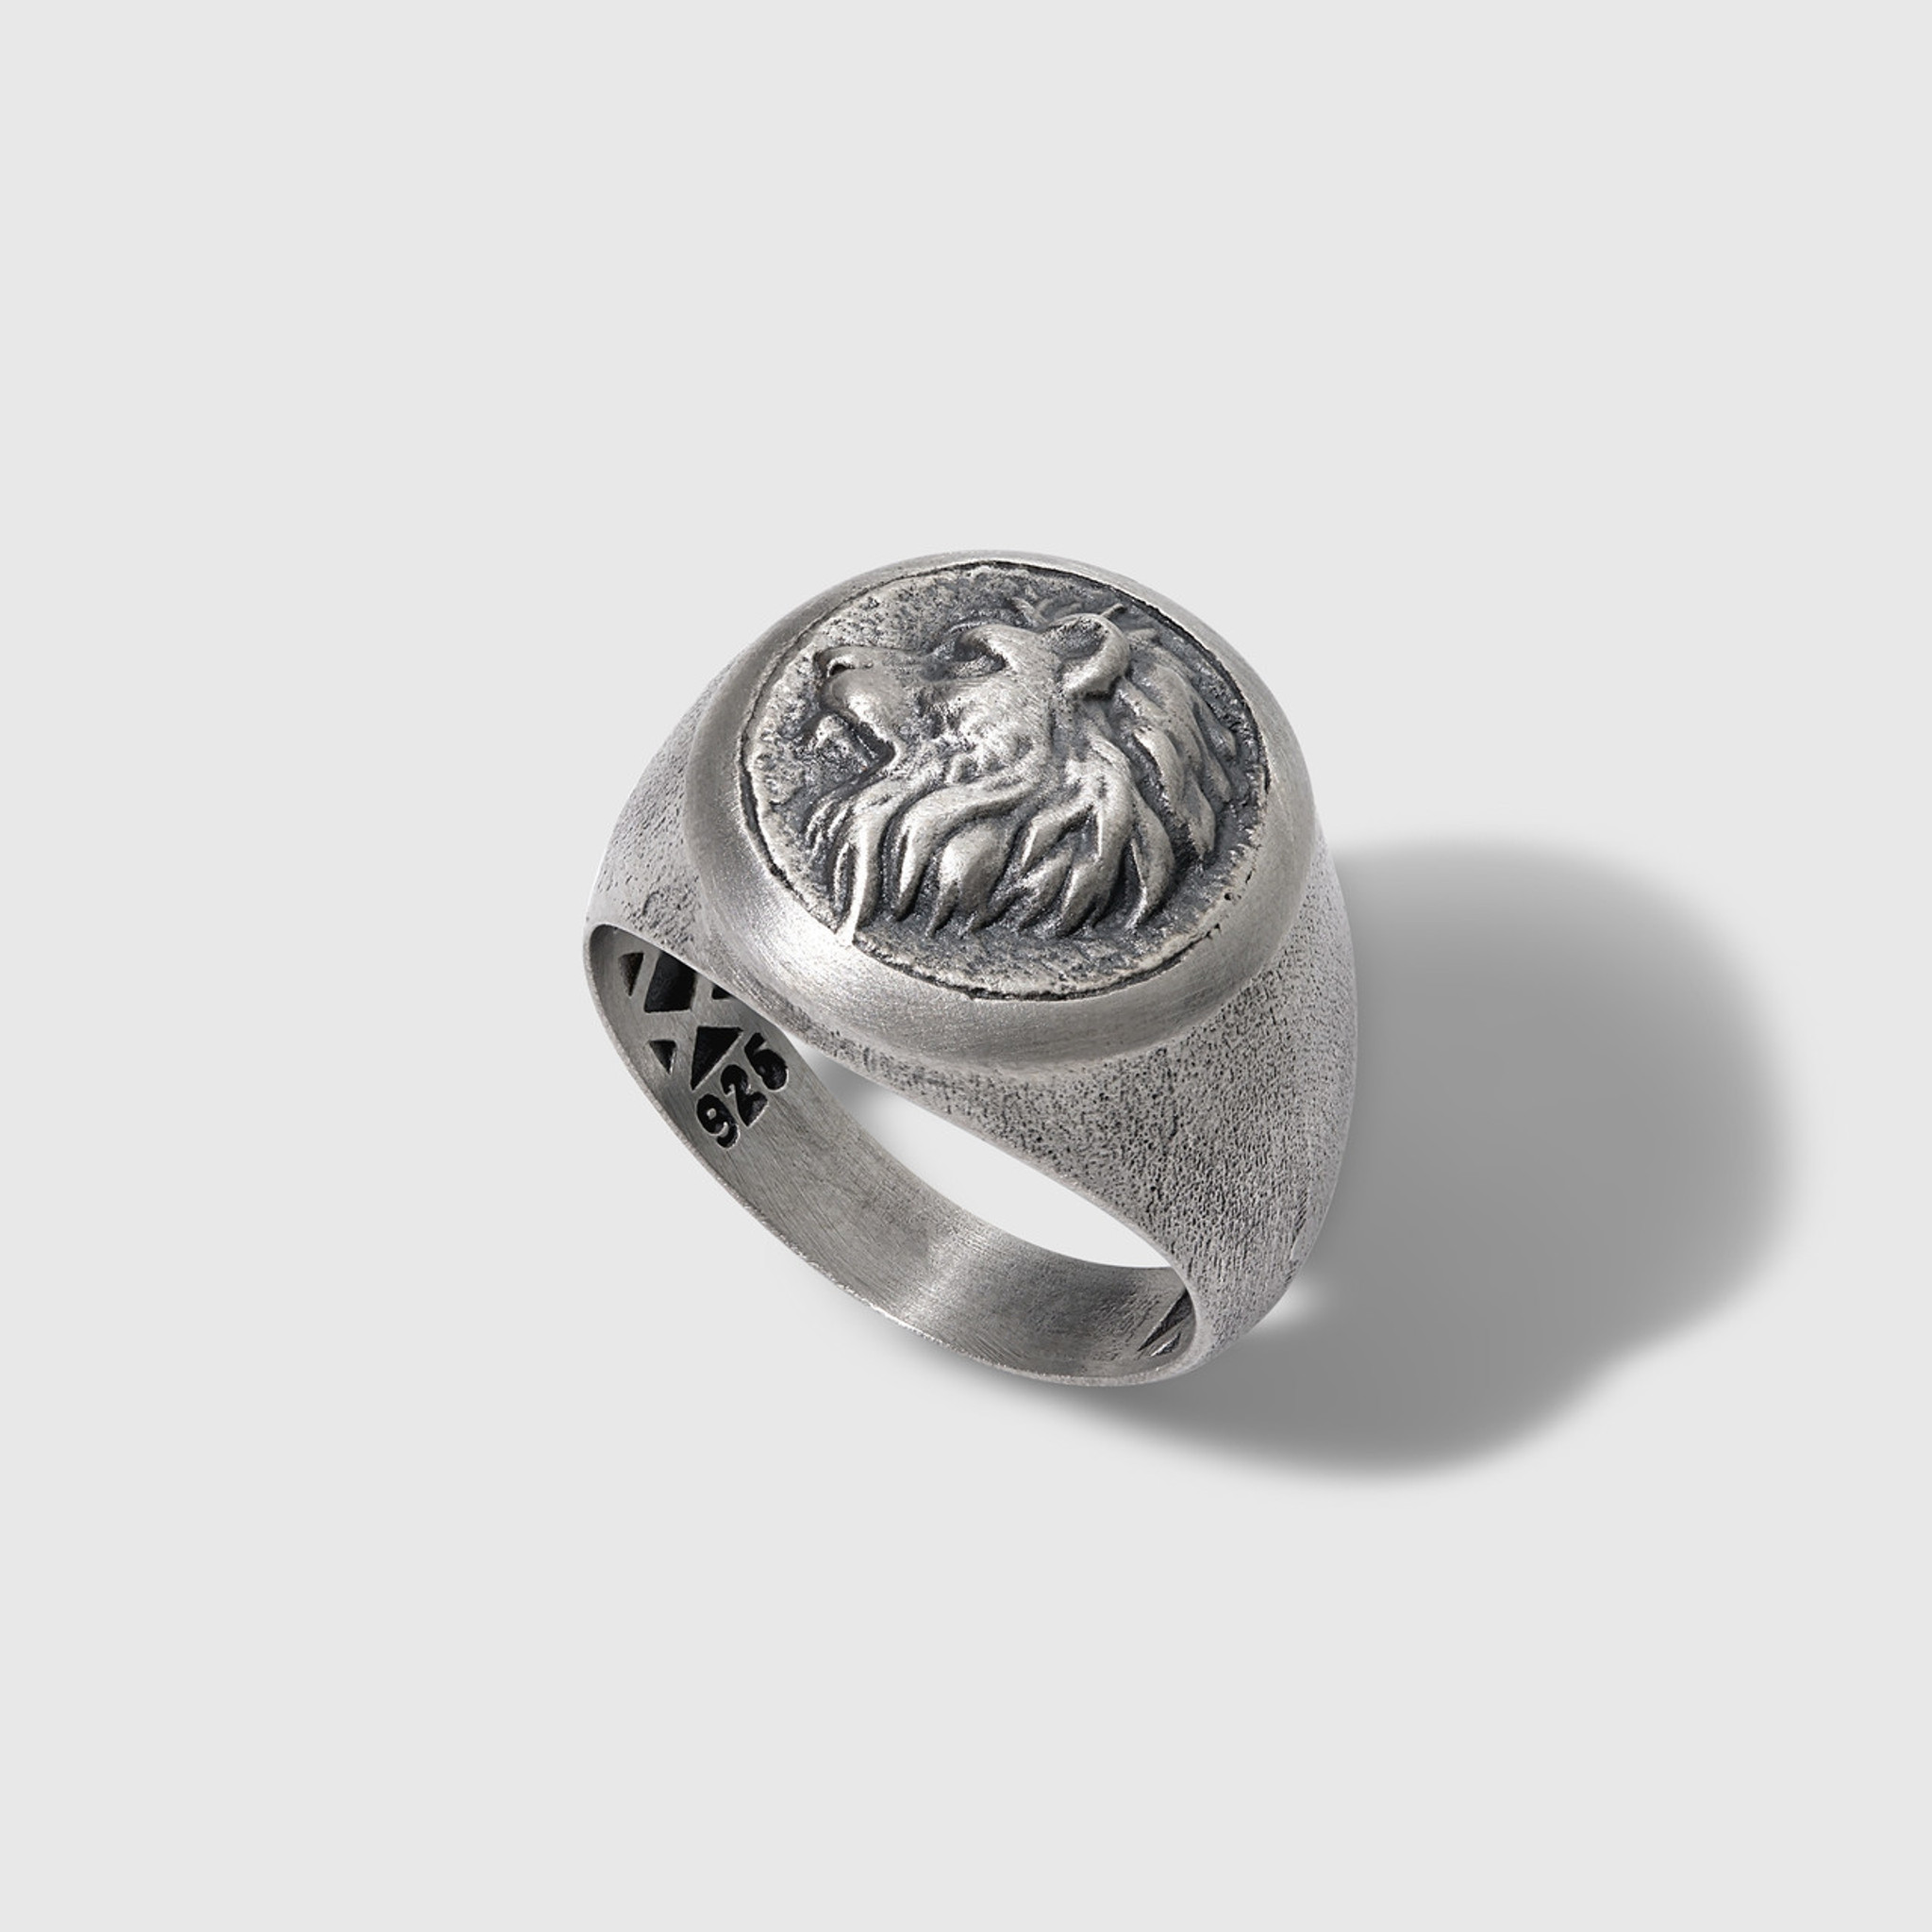 Espada Silver Lion Pinky Ring, Sterling Silver 